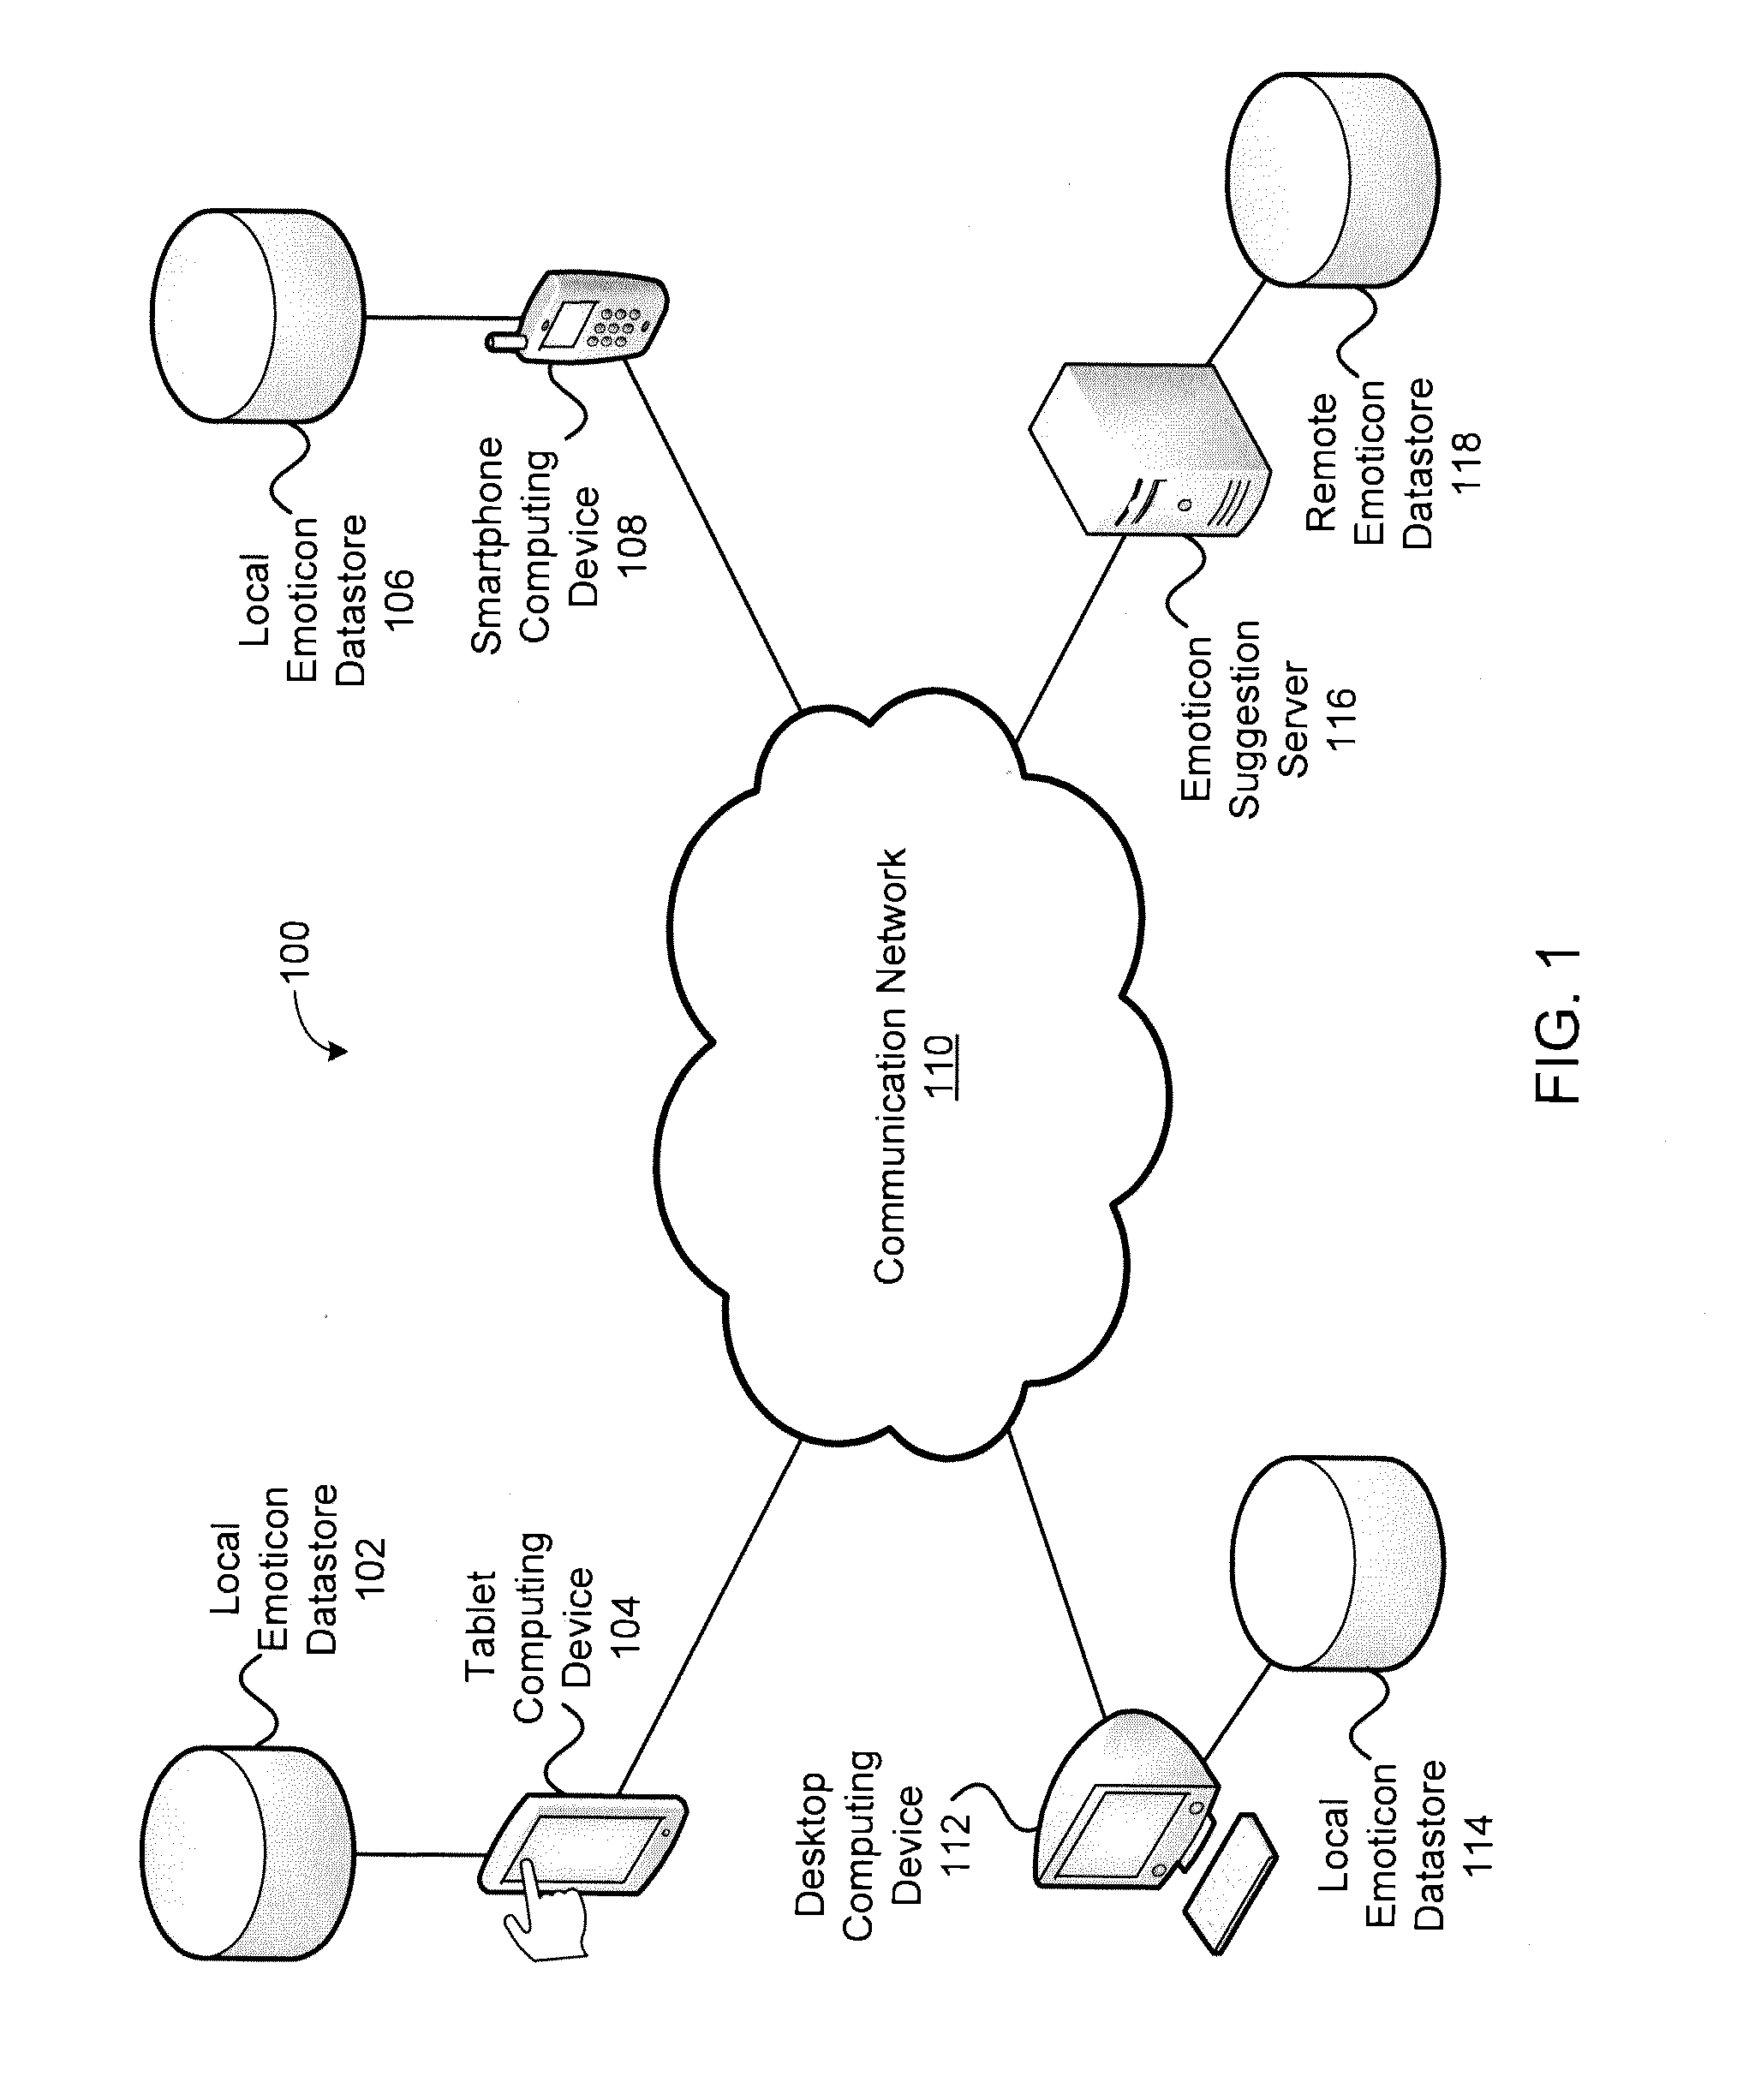 Systems and Methods for Identifying and Suggesting Emoticons